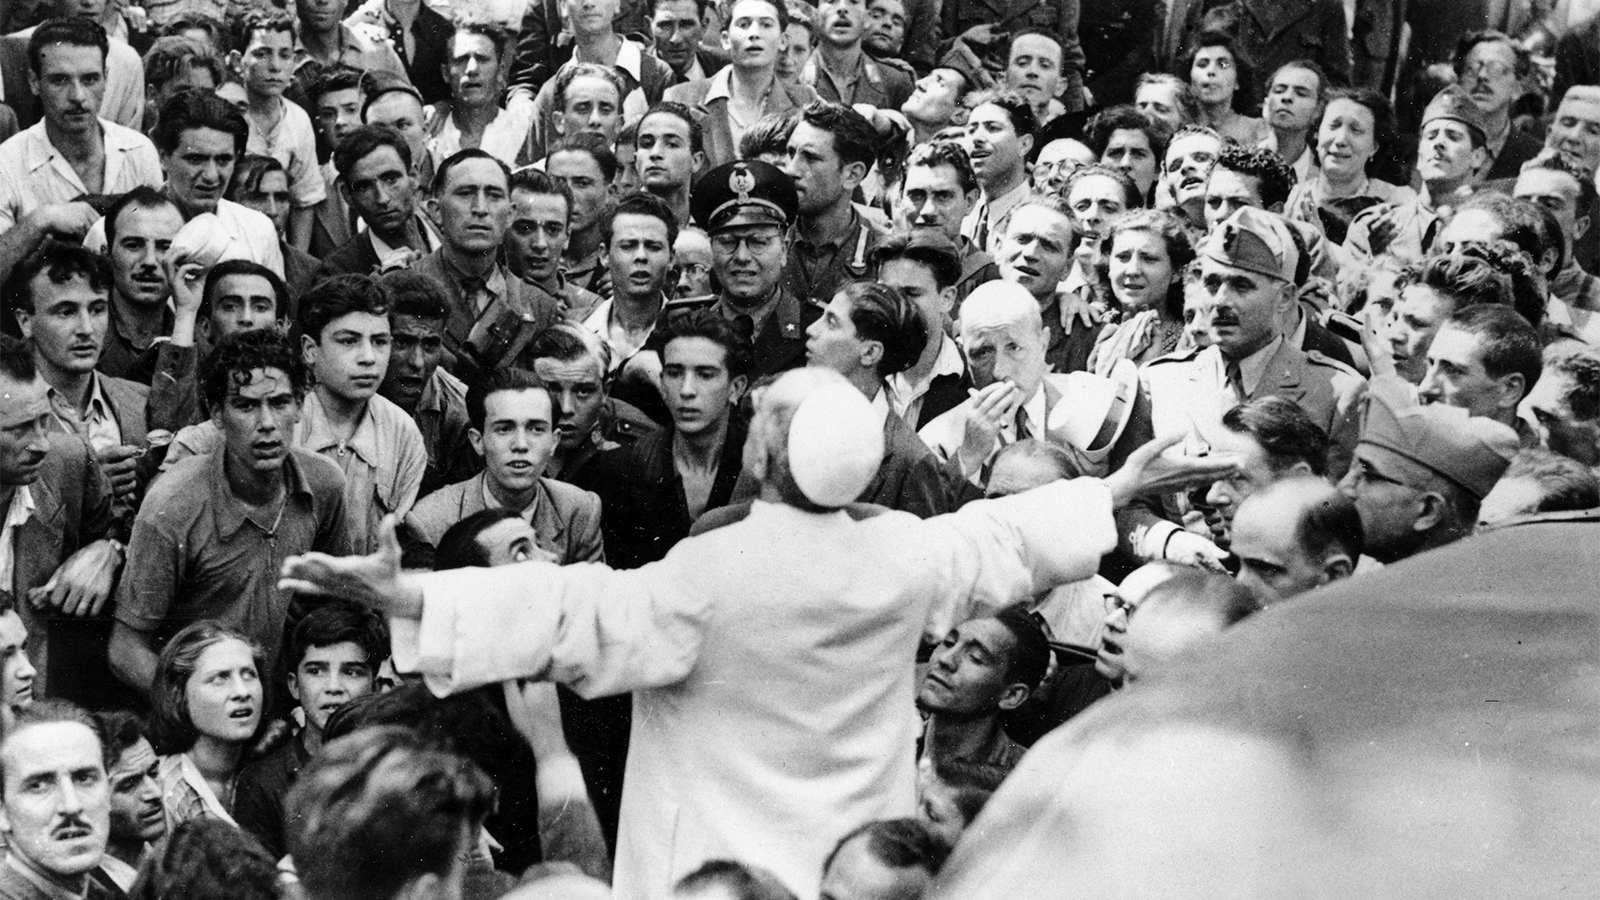 Men, women and soldiers gather around Pope Pius XII, his arms outstretched, during his inspection tour of Rome, Italy, after American air raids in World War II, on Oct. 15, 1943. (AP Photo)